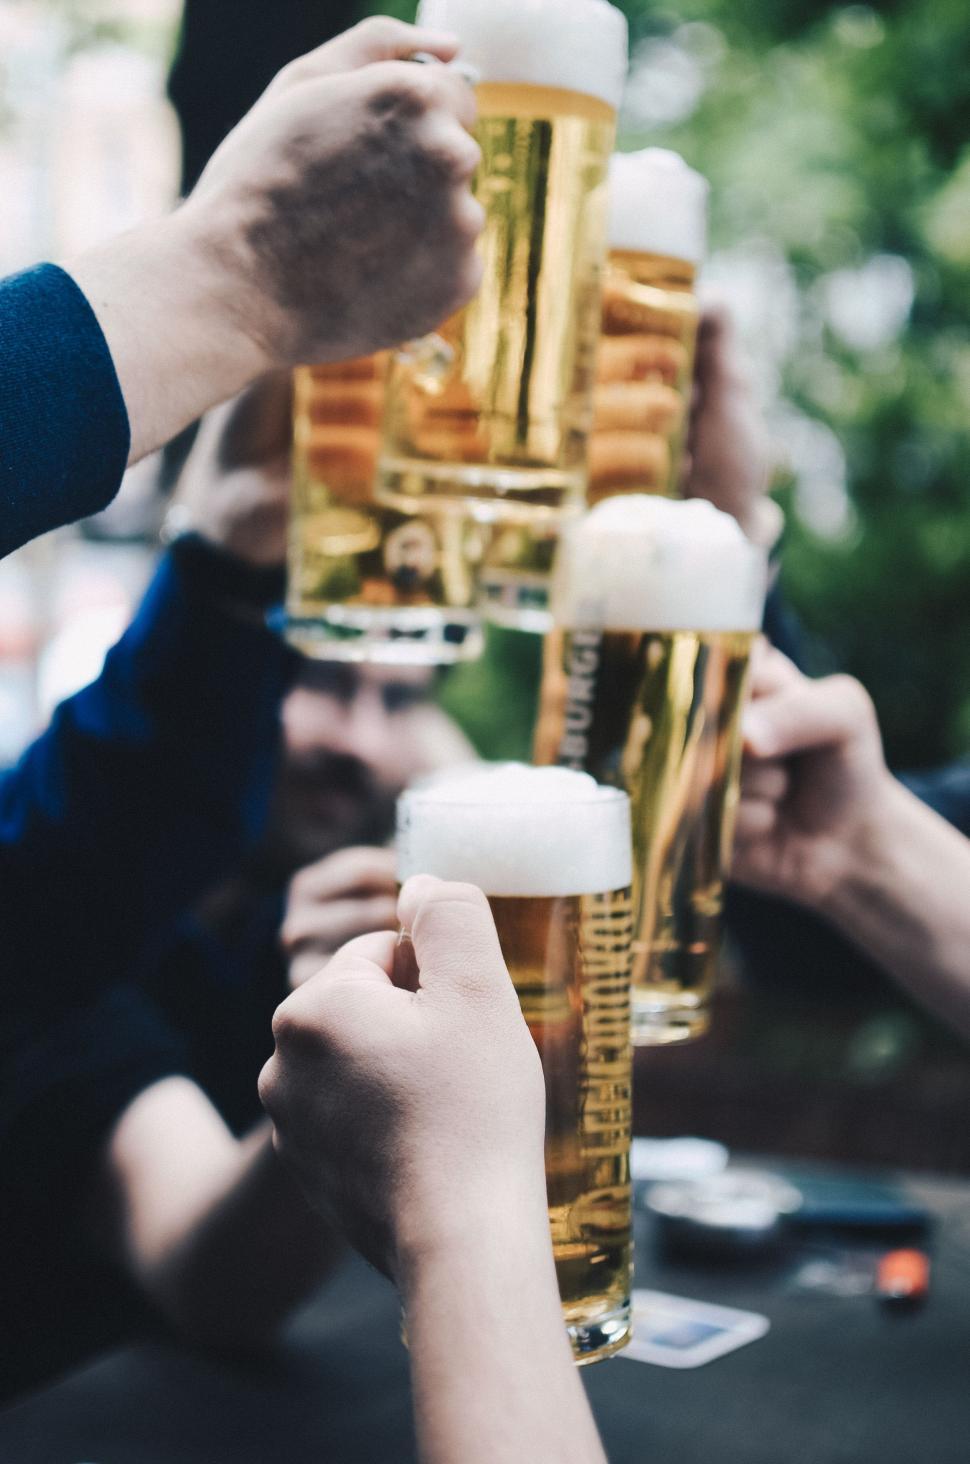 Free Image of Group of People Toasting With Glasses of Beer 